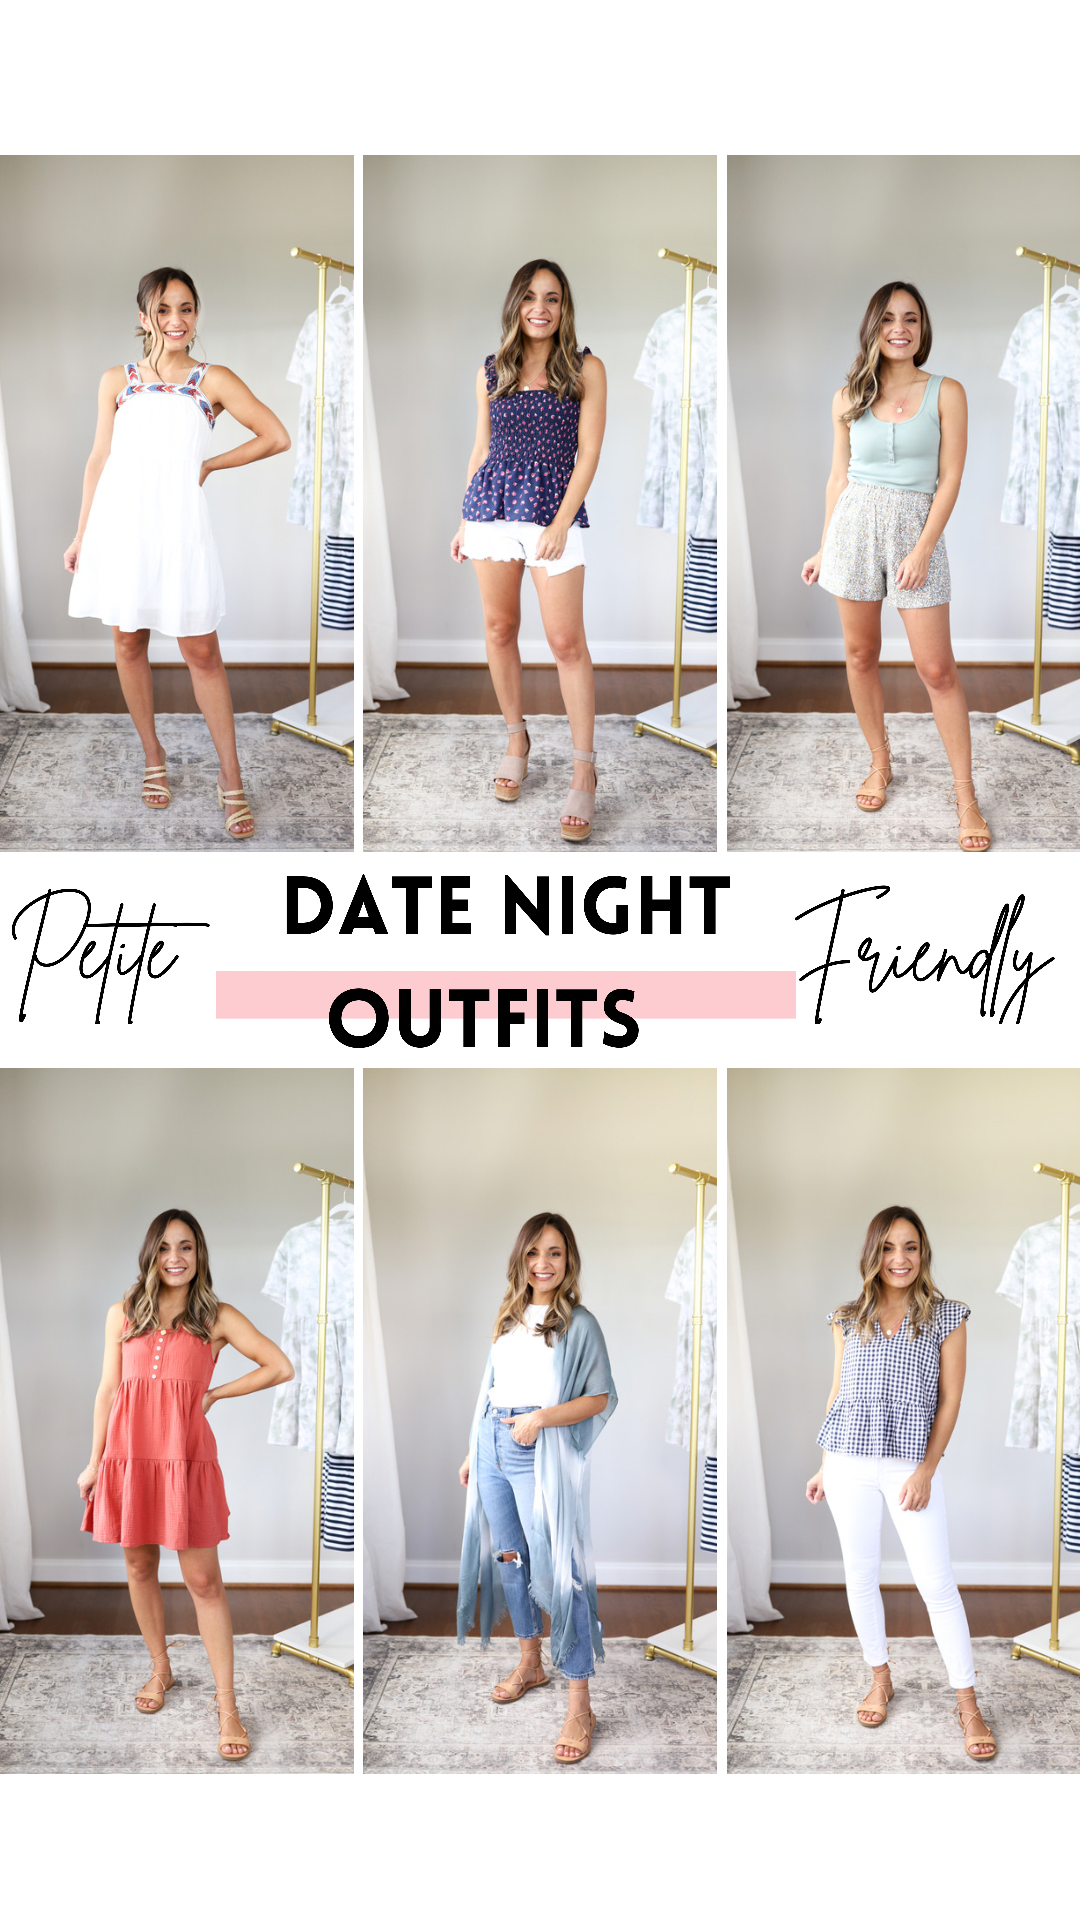 Date Night Dresses & Dinner Date Outfit Ideas